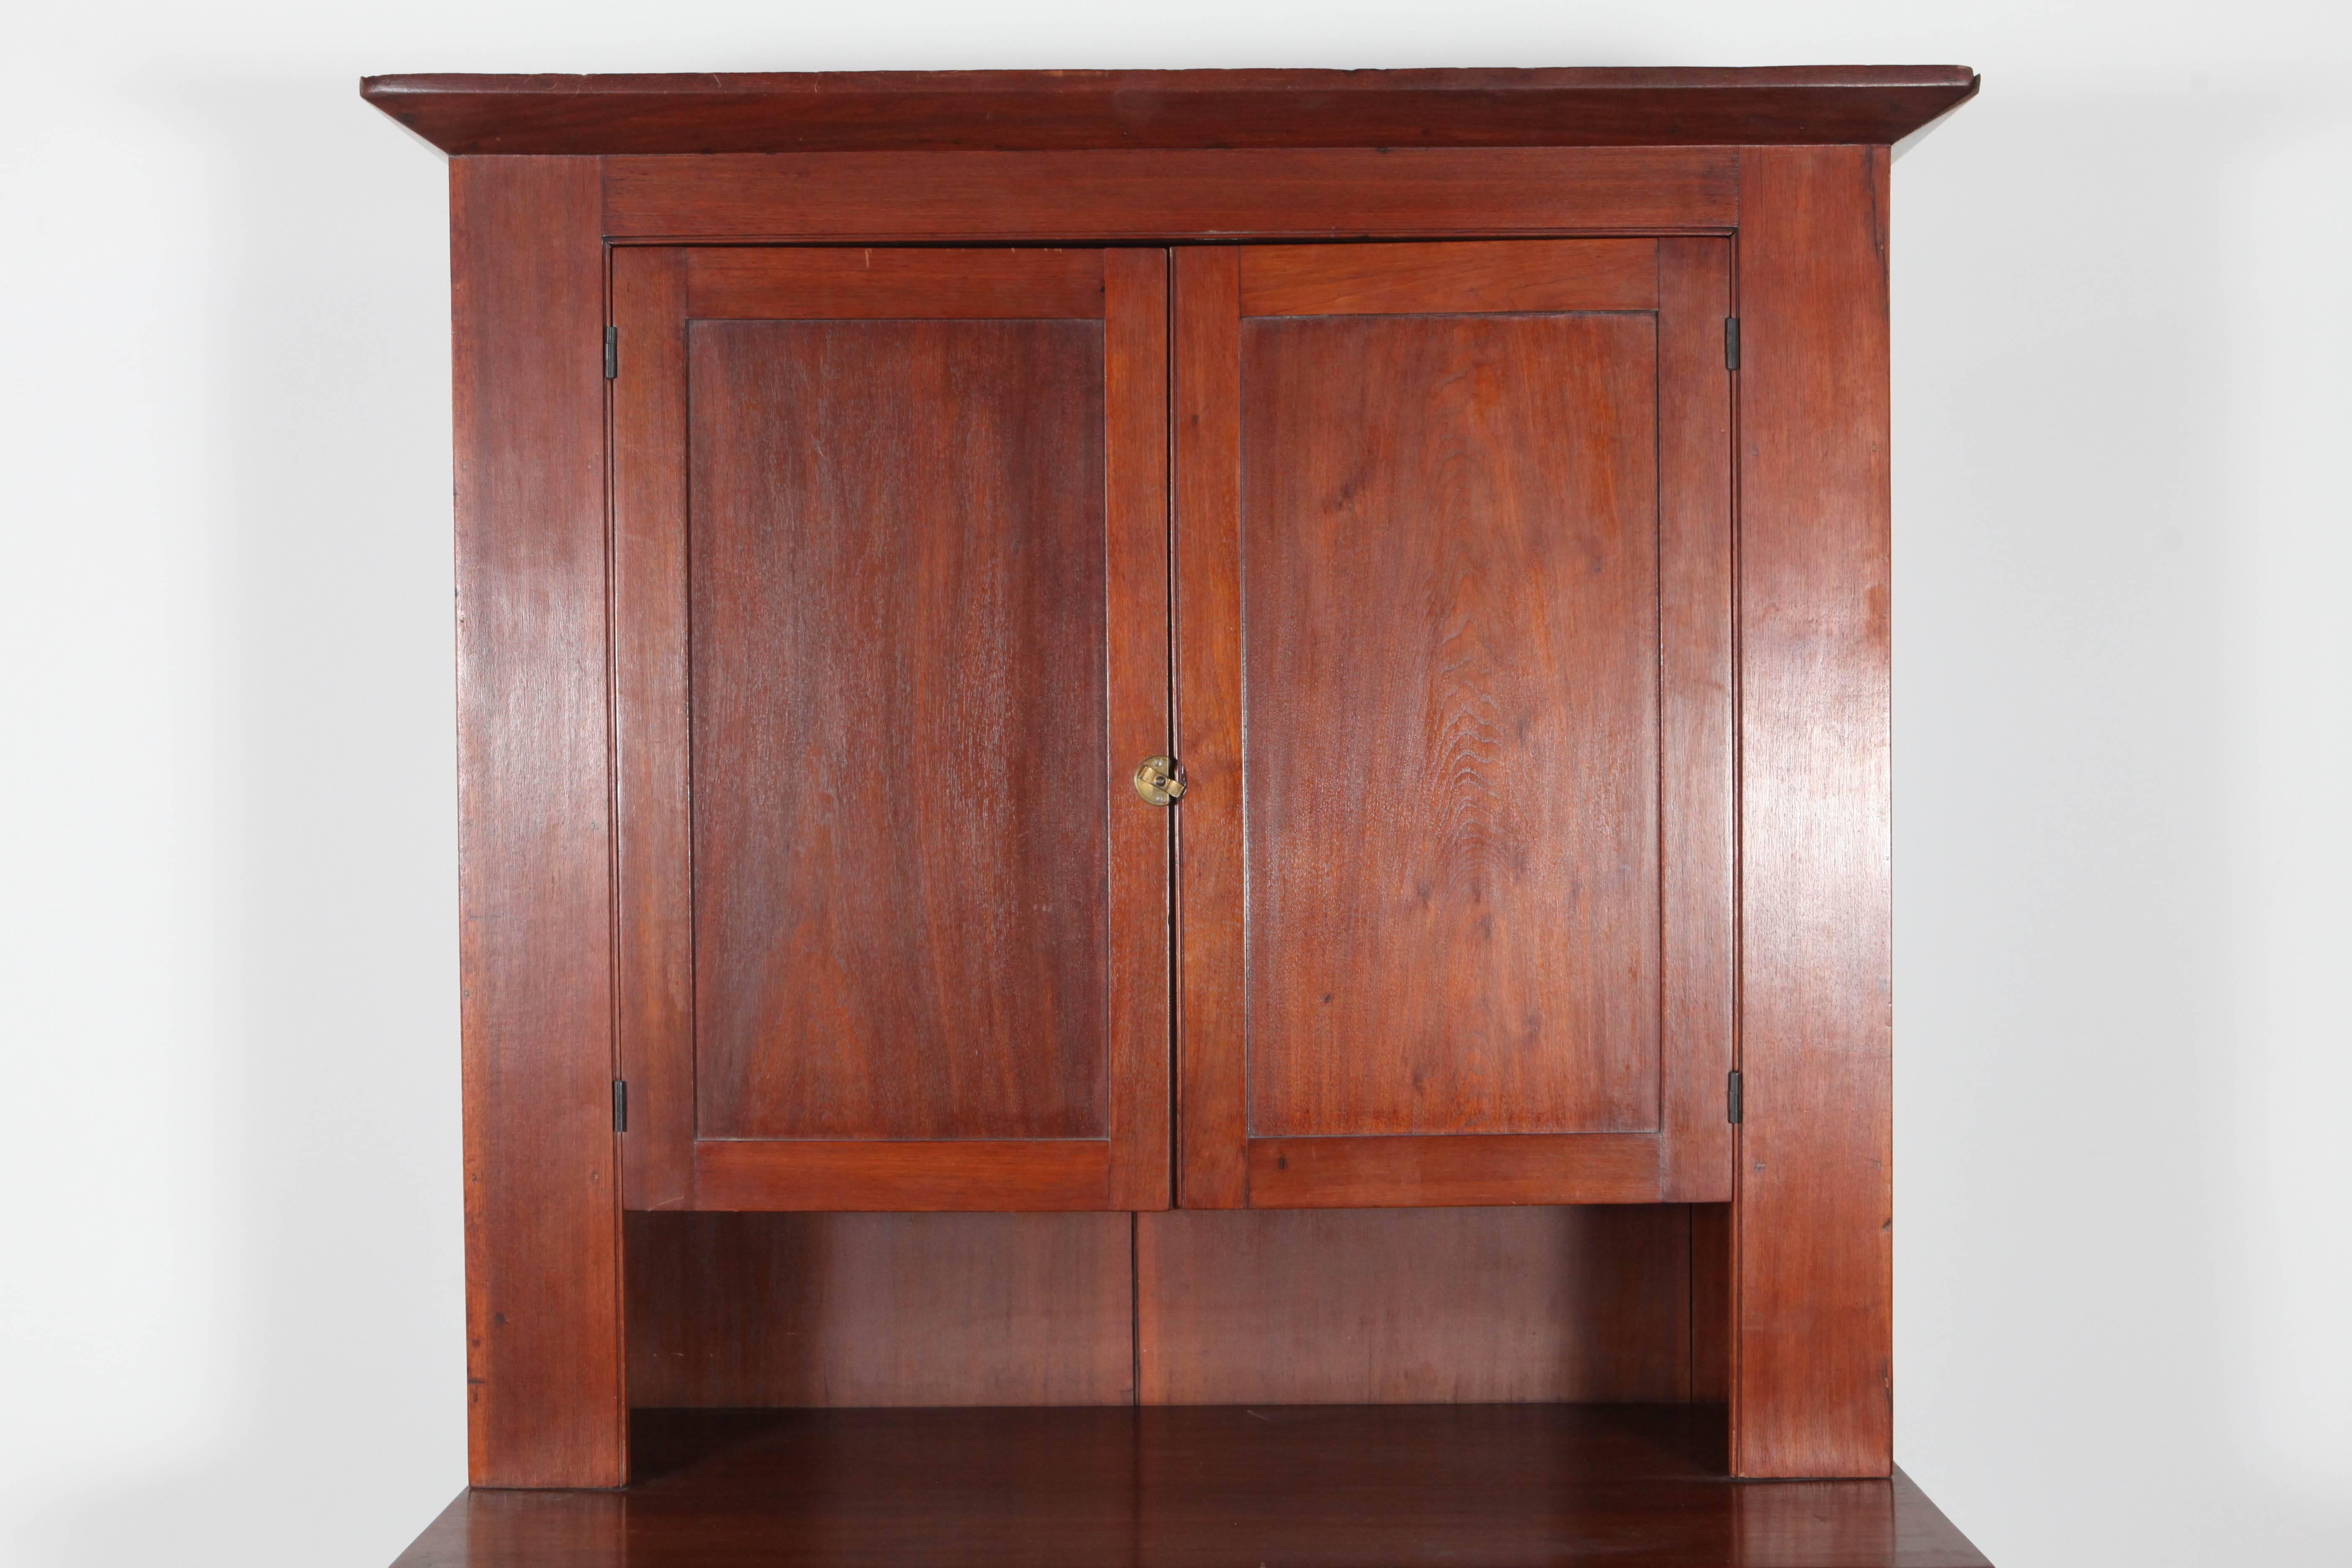 Beautiful Farm style cabinet and hutch. Top of lower cabinet measures 36.5